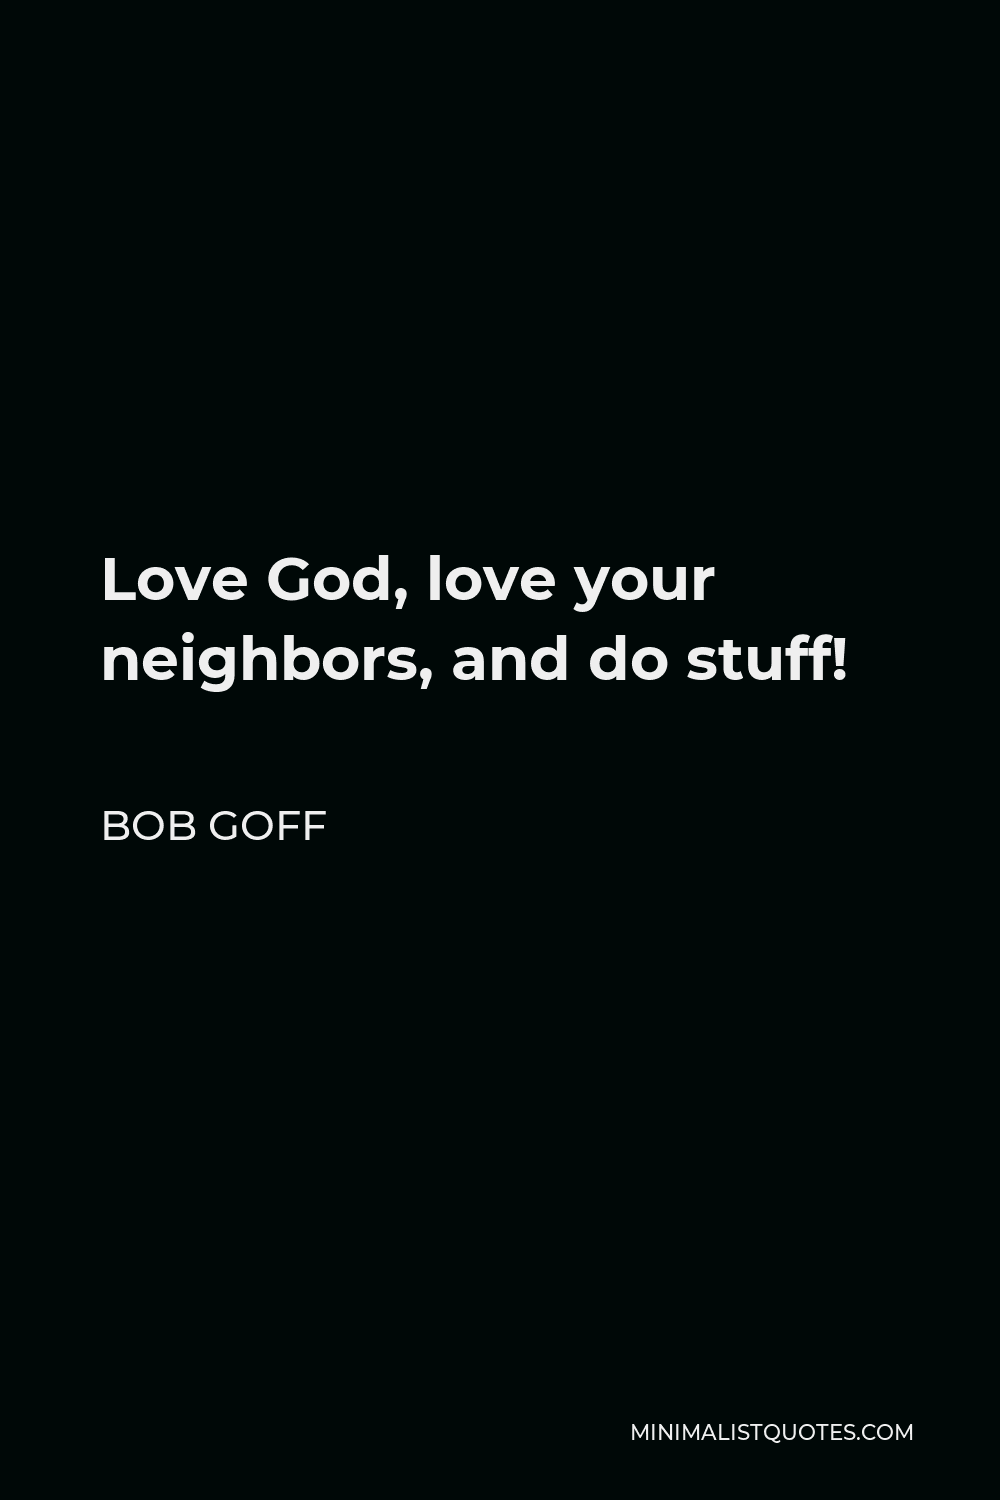 Bob Goff Quote - Love God, love your neighbors, and do stuff!